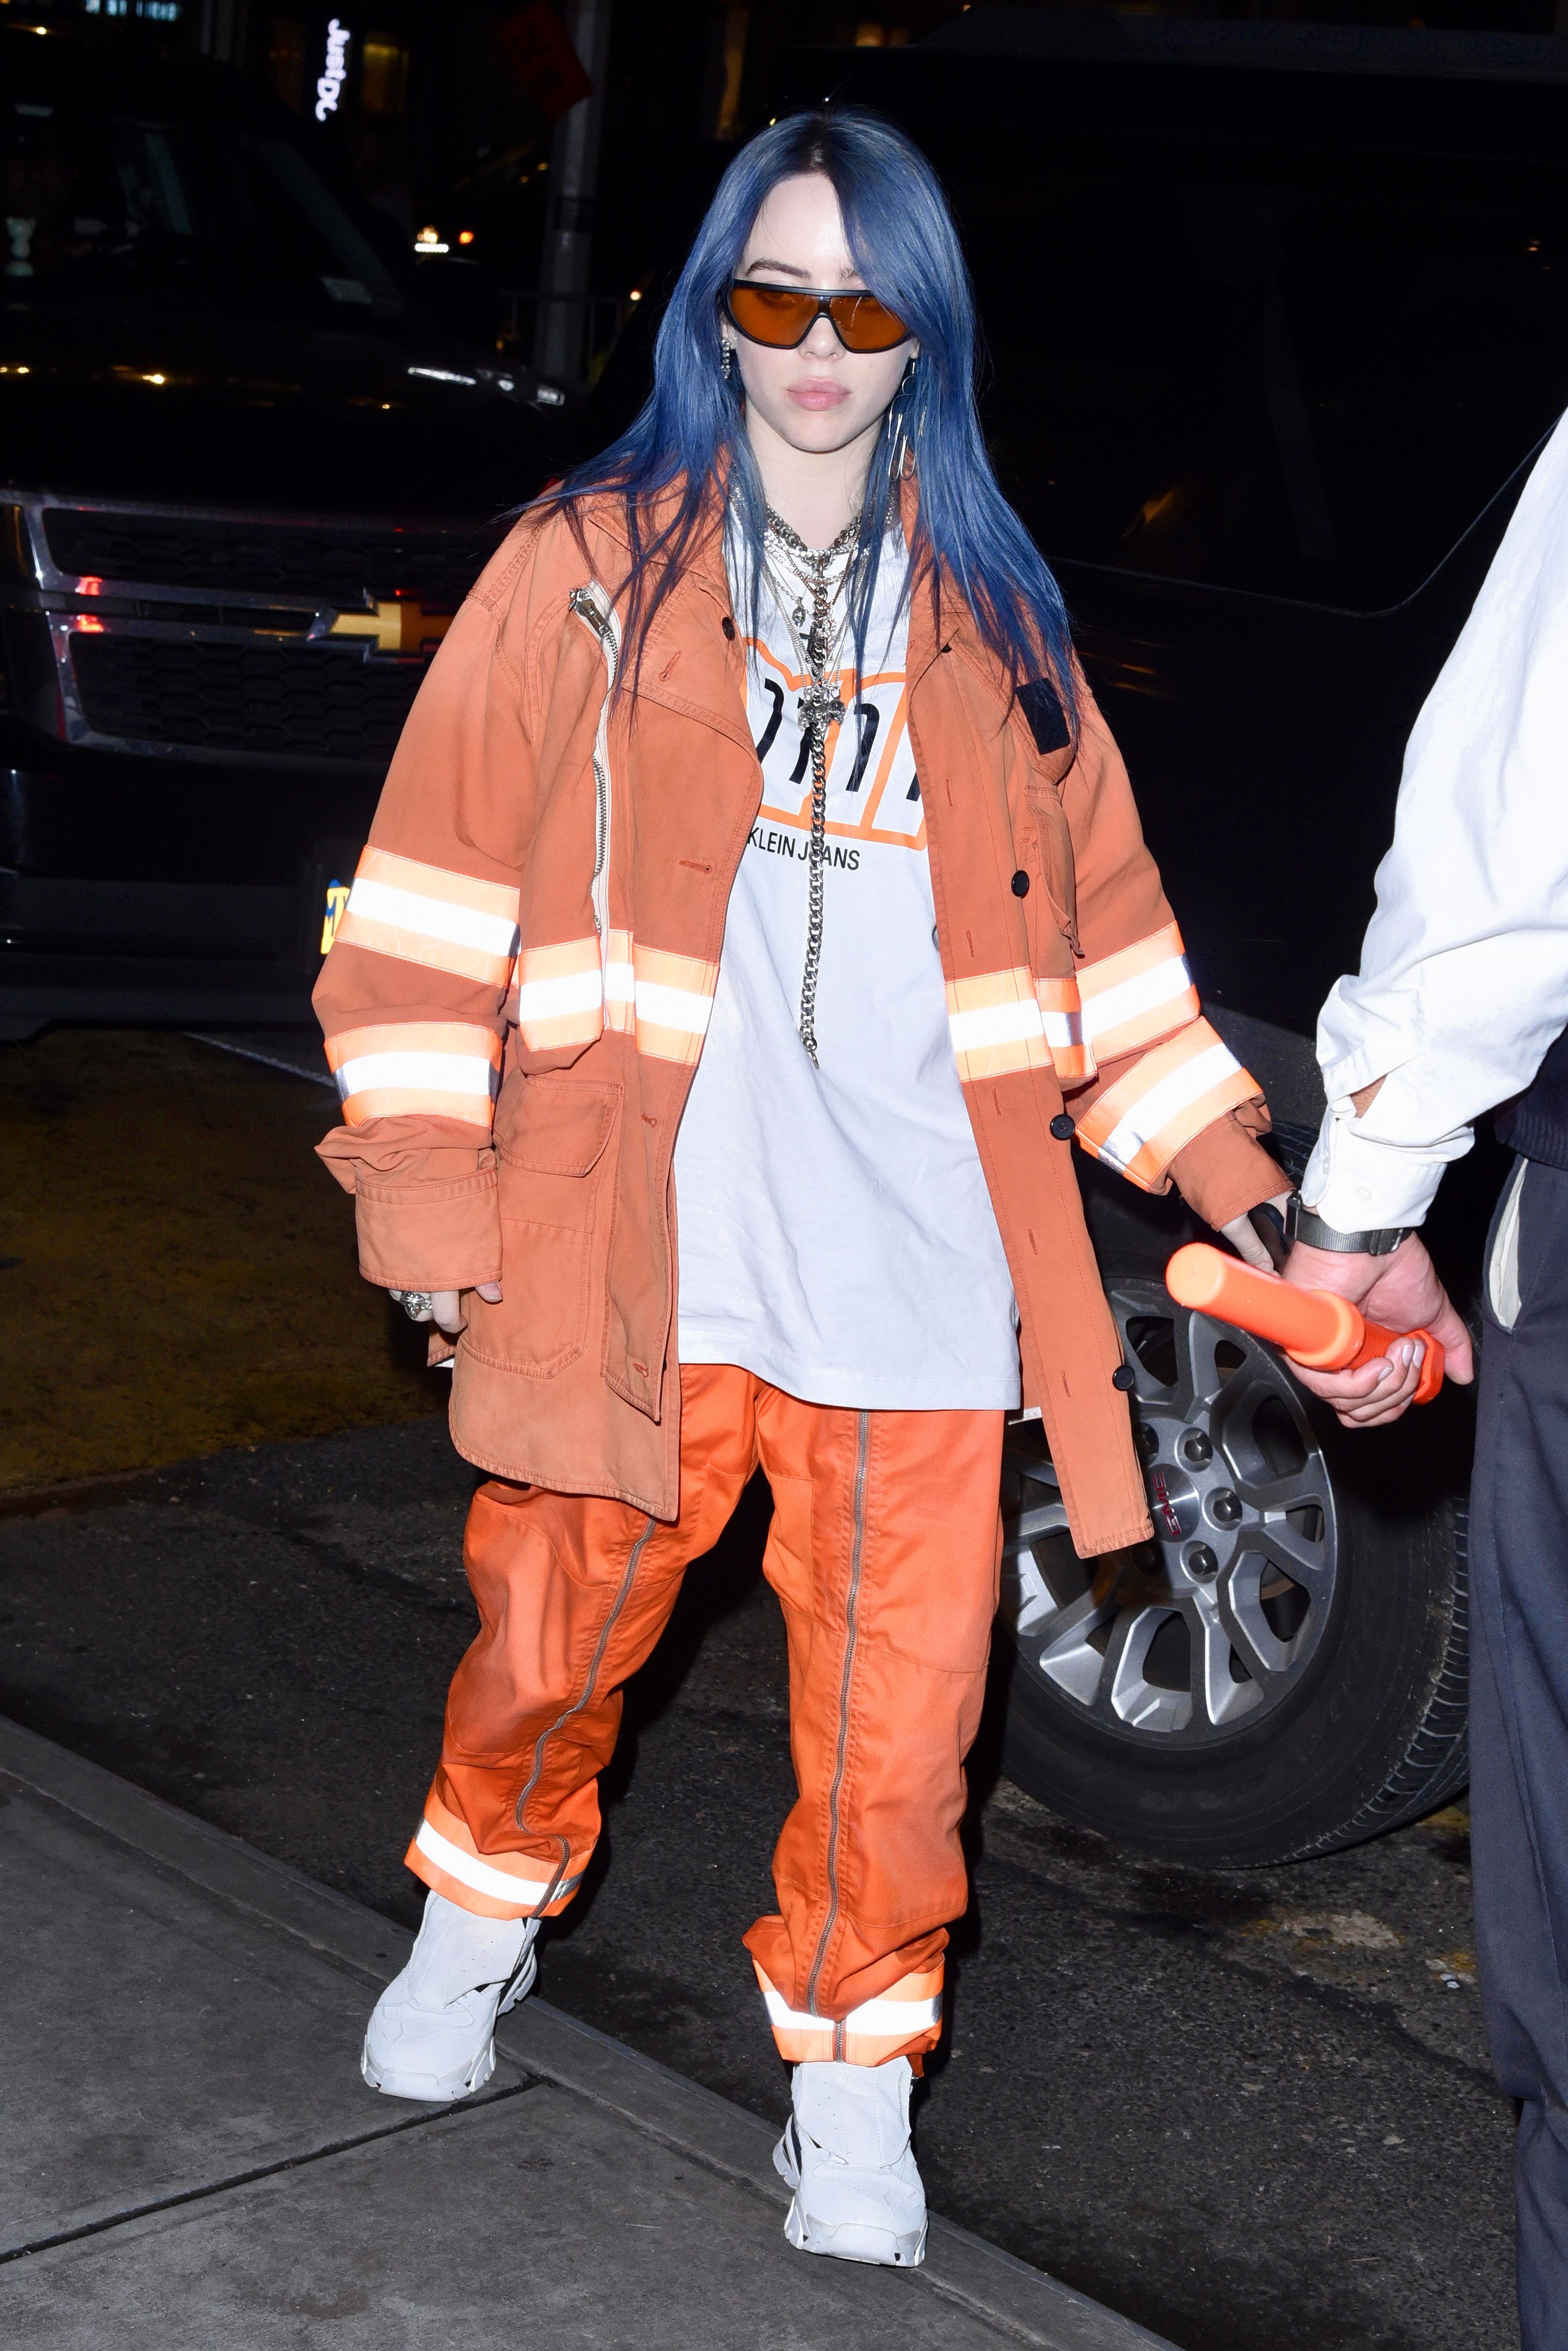 Billie Eilish's Style See the Singer's Best Fashion Moments Over the Years